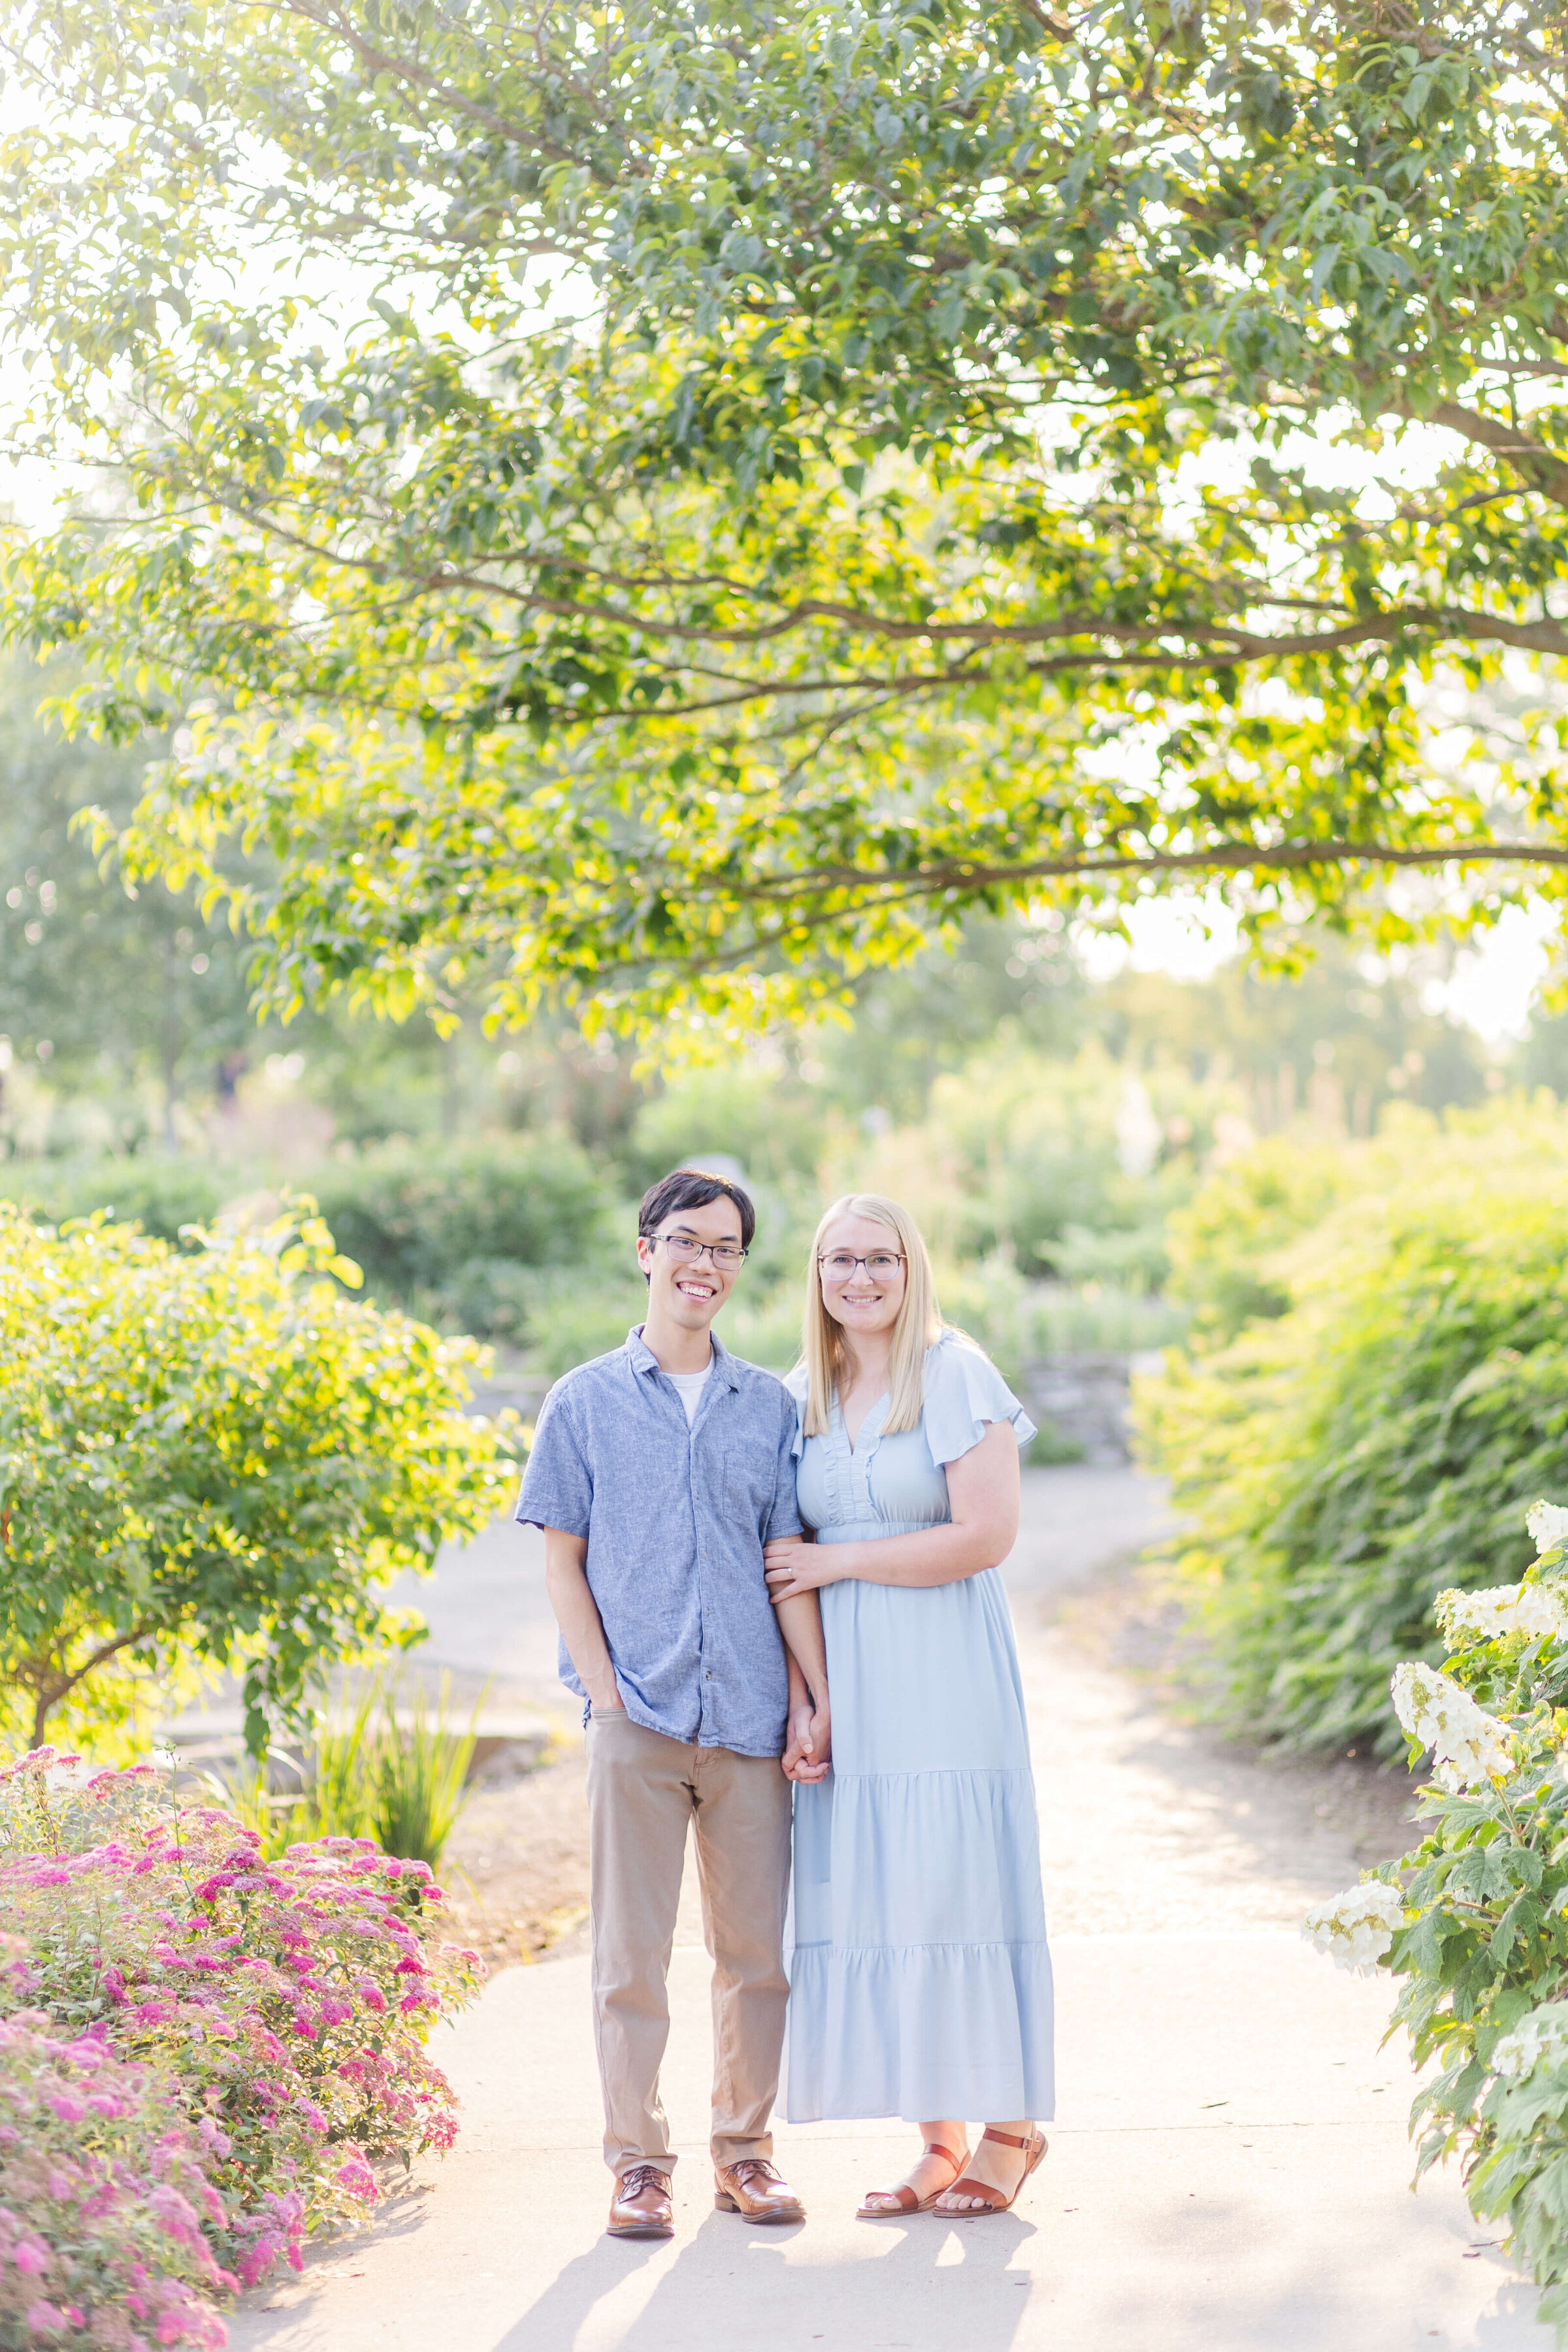 A man holds hands with his fiancee who is wearing a blue dress. It's a beautiful summer evening as the sun glows through trees.